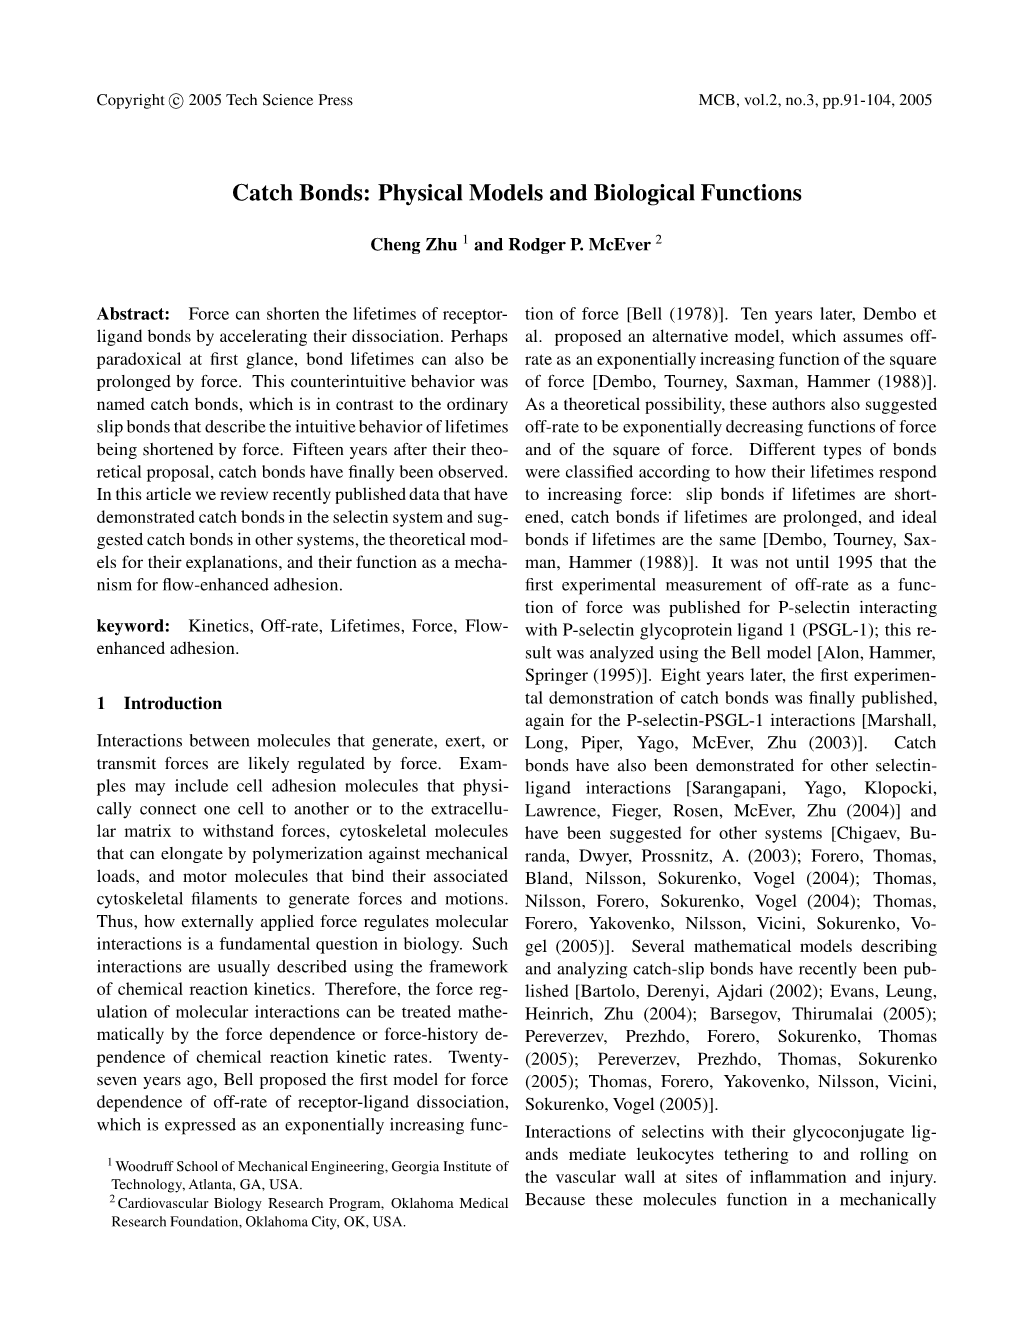 Catch Bonds: Physical Models and Biological Functions